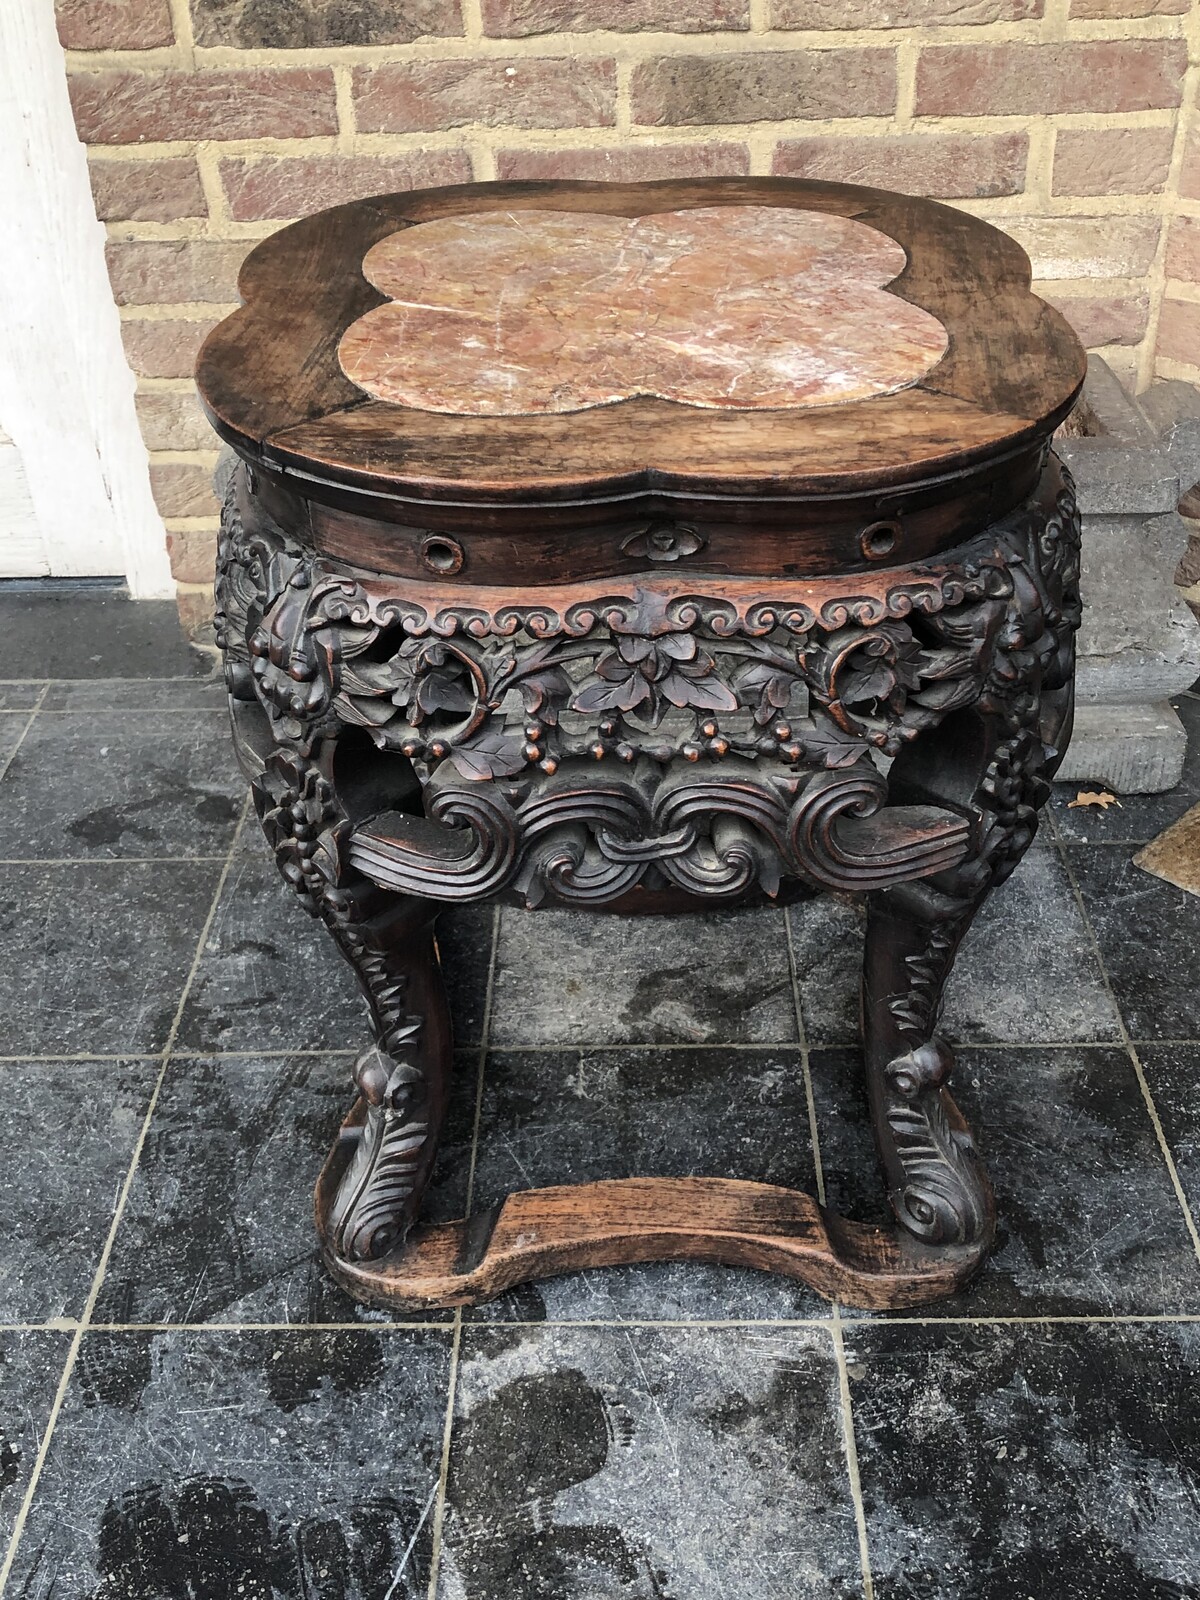 Asiatique Chinese stand table